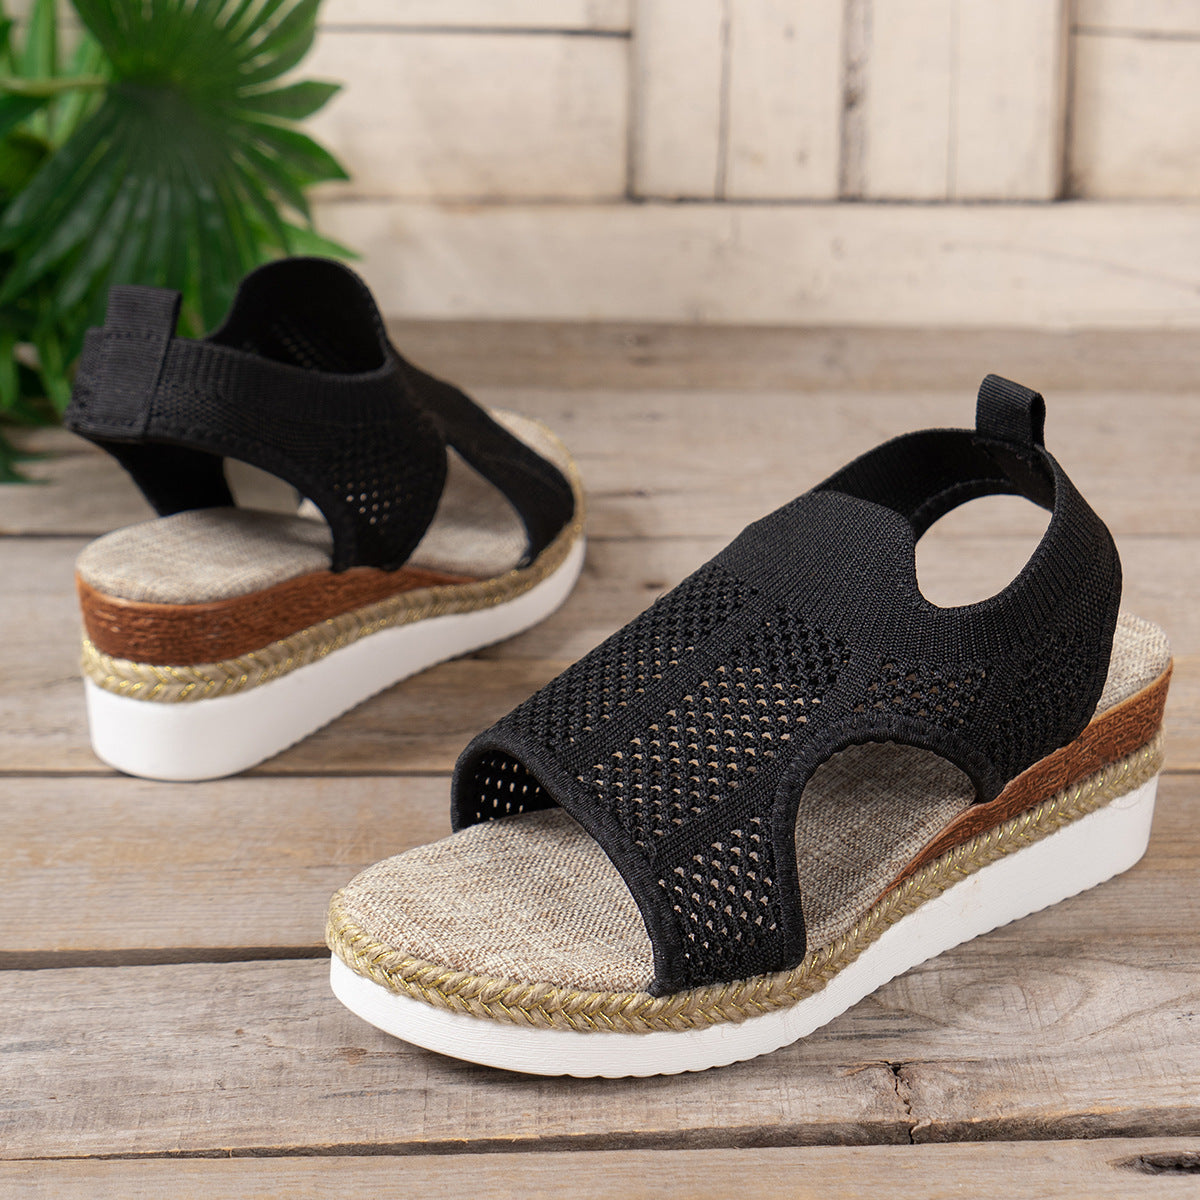 New Hollow Wedges Sandals: Summer Peep-Toe Fly Woven Mesh Shoes for Women